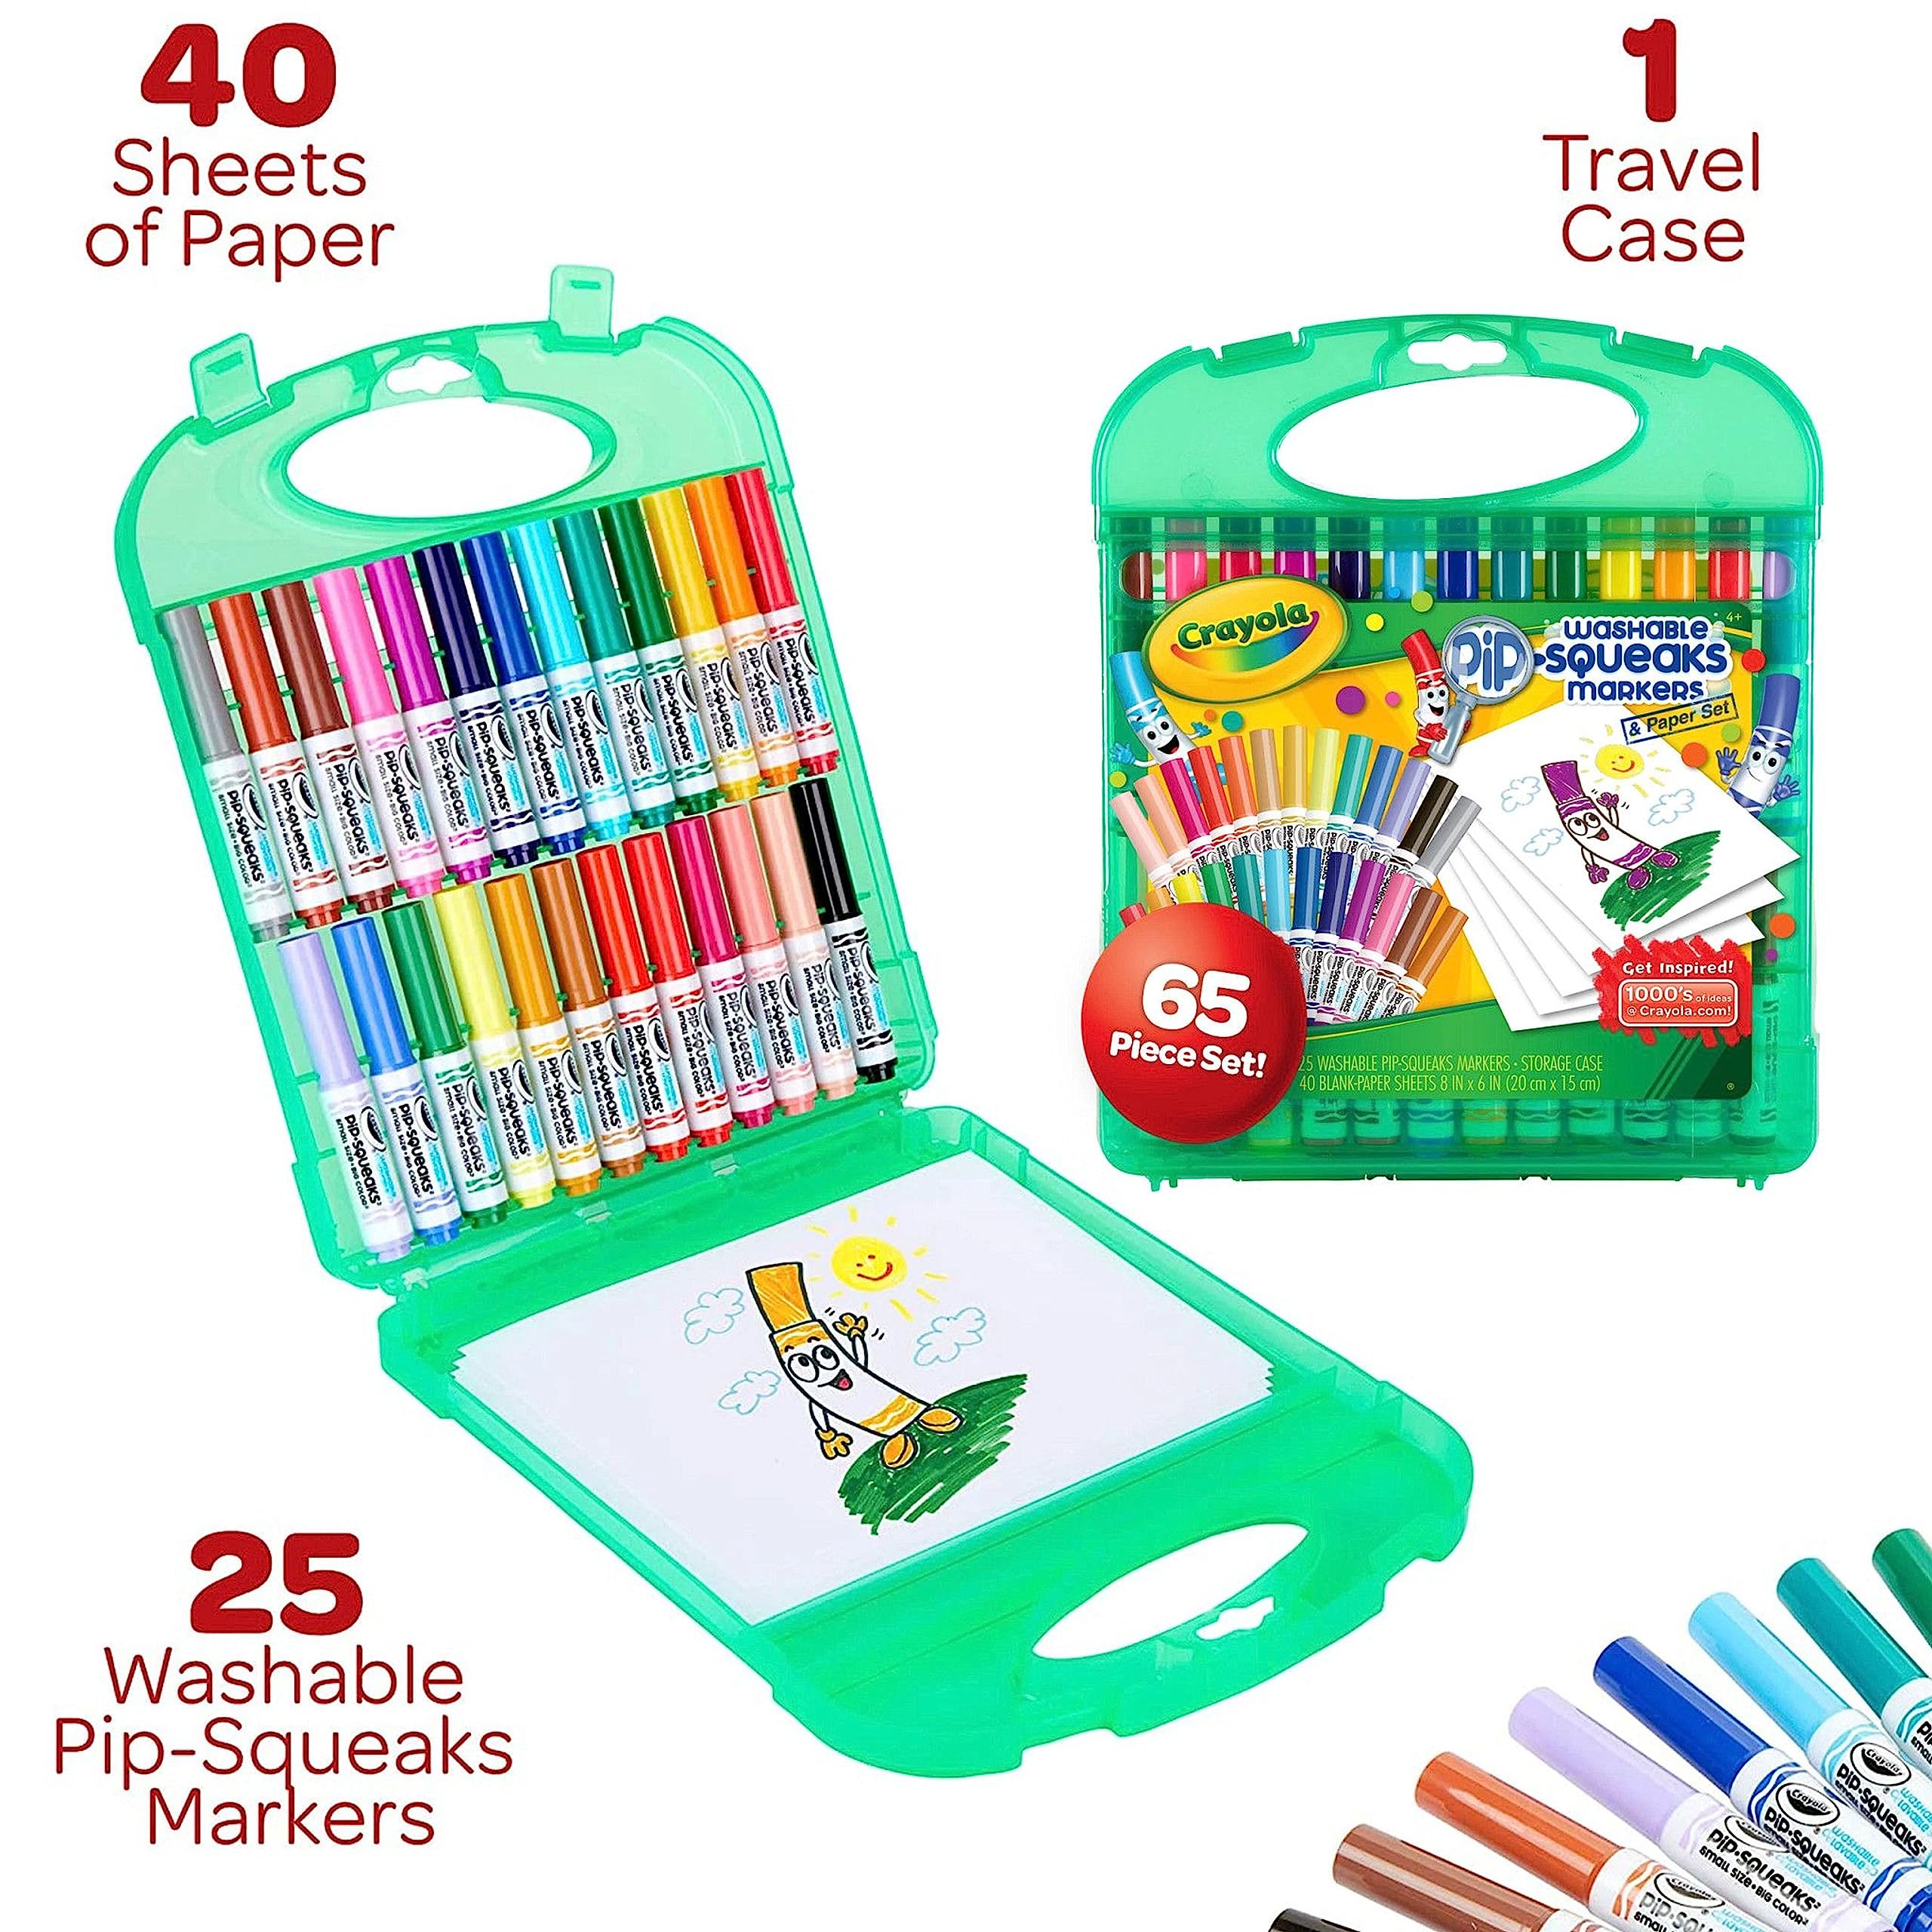 Crayola Pip Squeaks Marker Set (65ct), Washable Markers for Kids, Kids Art Supplies for Classrooms, Mini Markers for School, Ages 4+